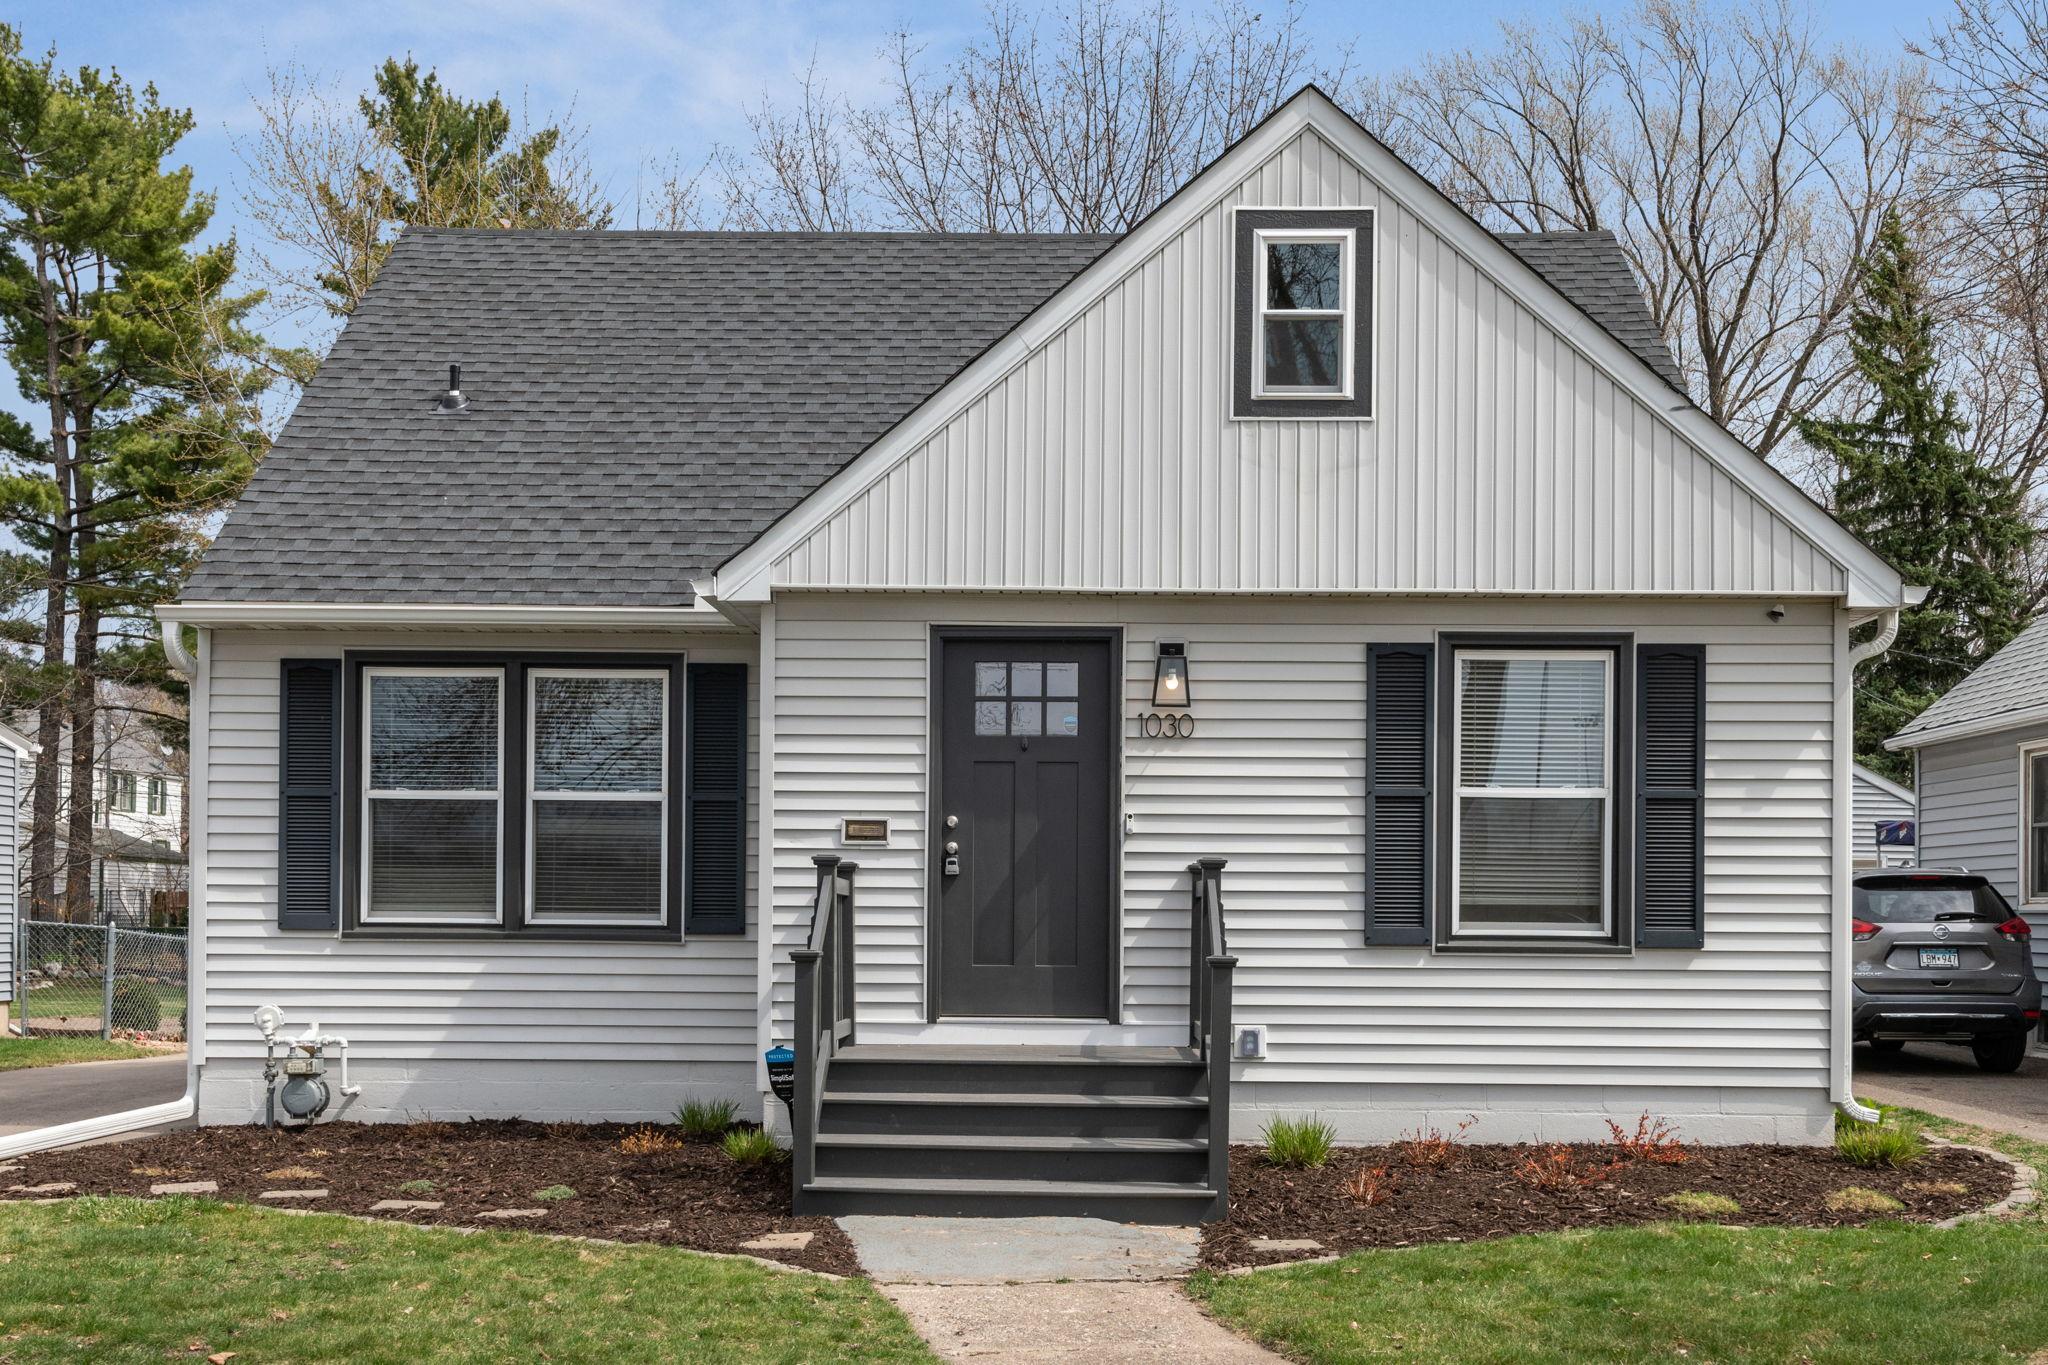 Welcome to Bidwell Street in West Saint Paul - Located across from a spacious athletics field and park this home offers upgrades, charm and a great location.